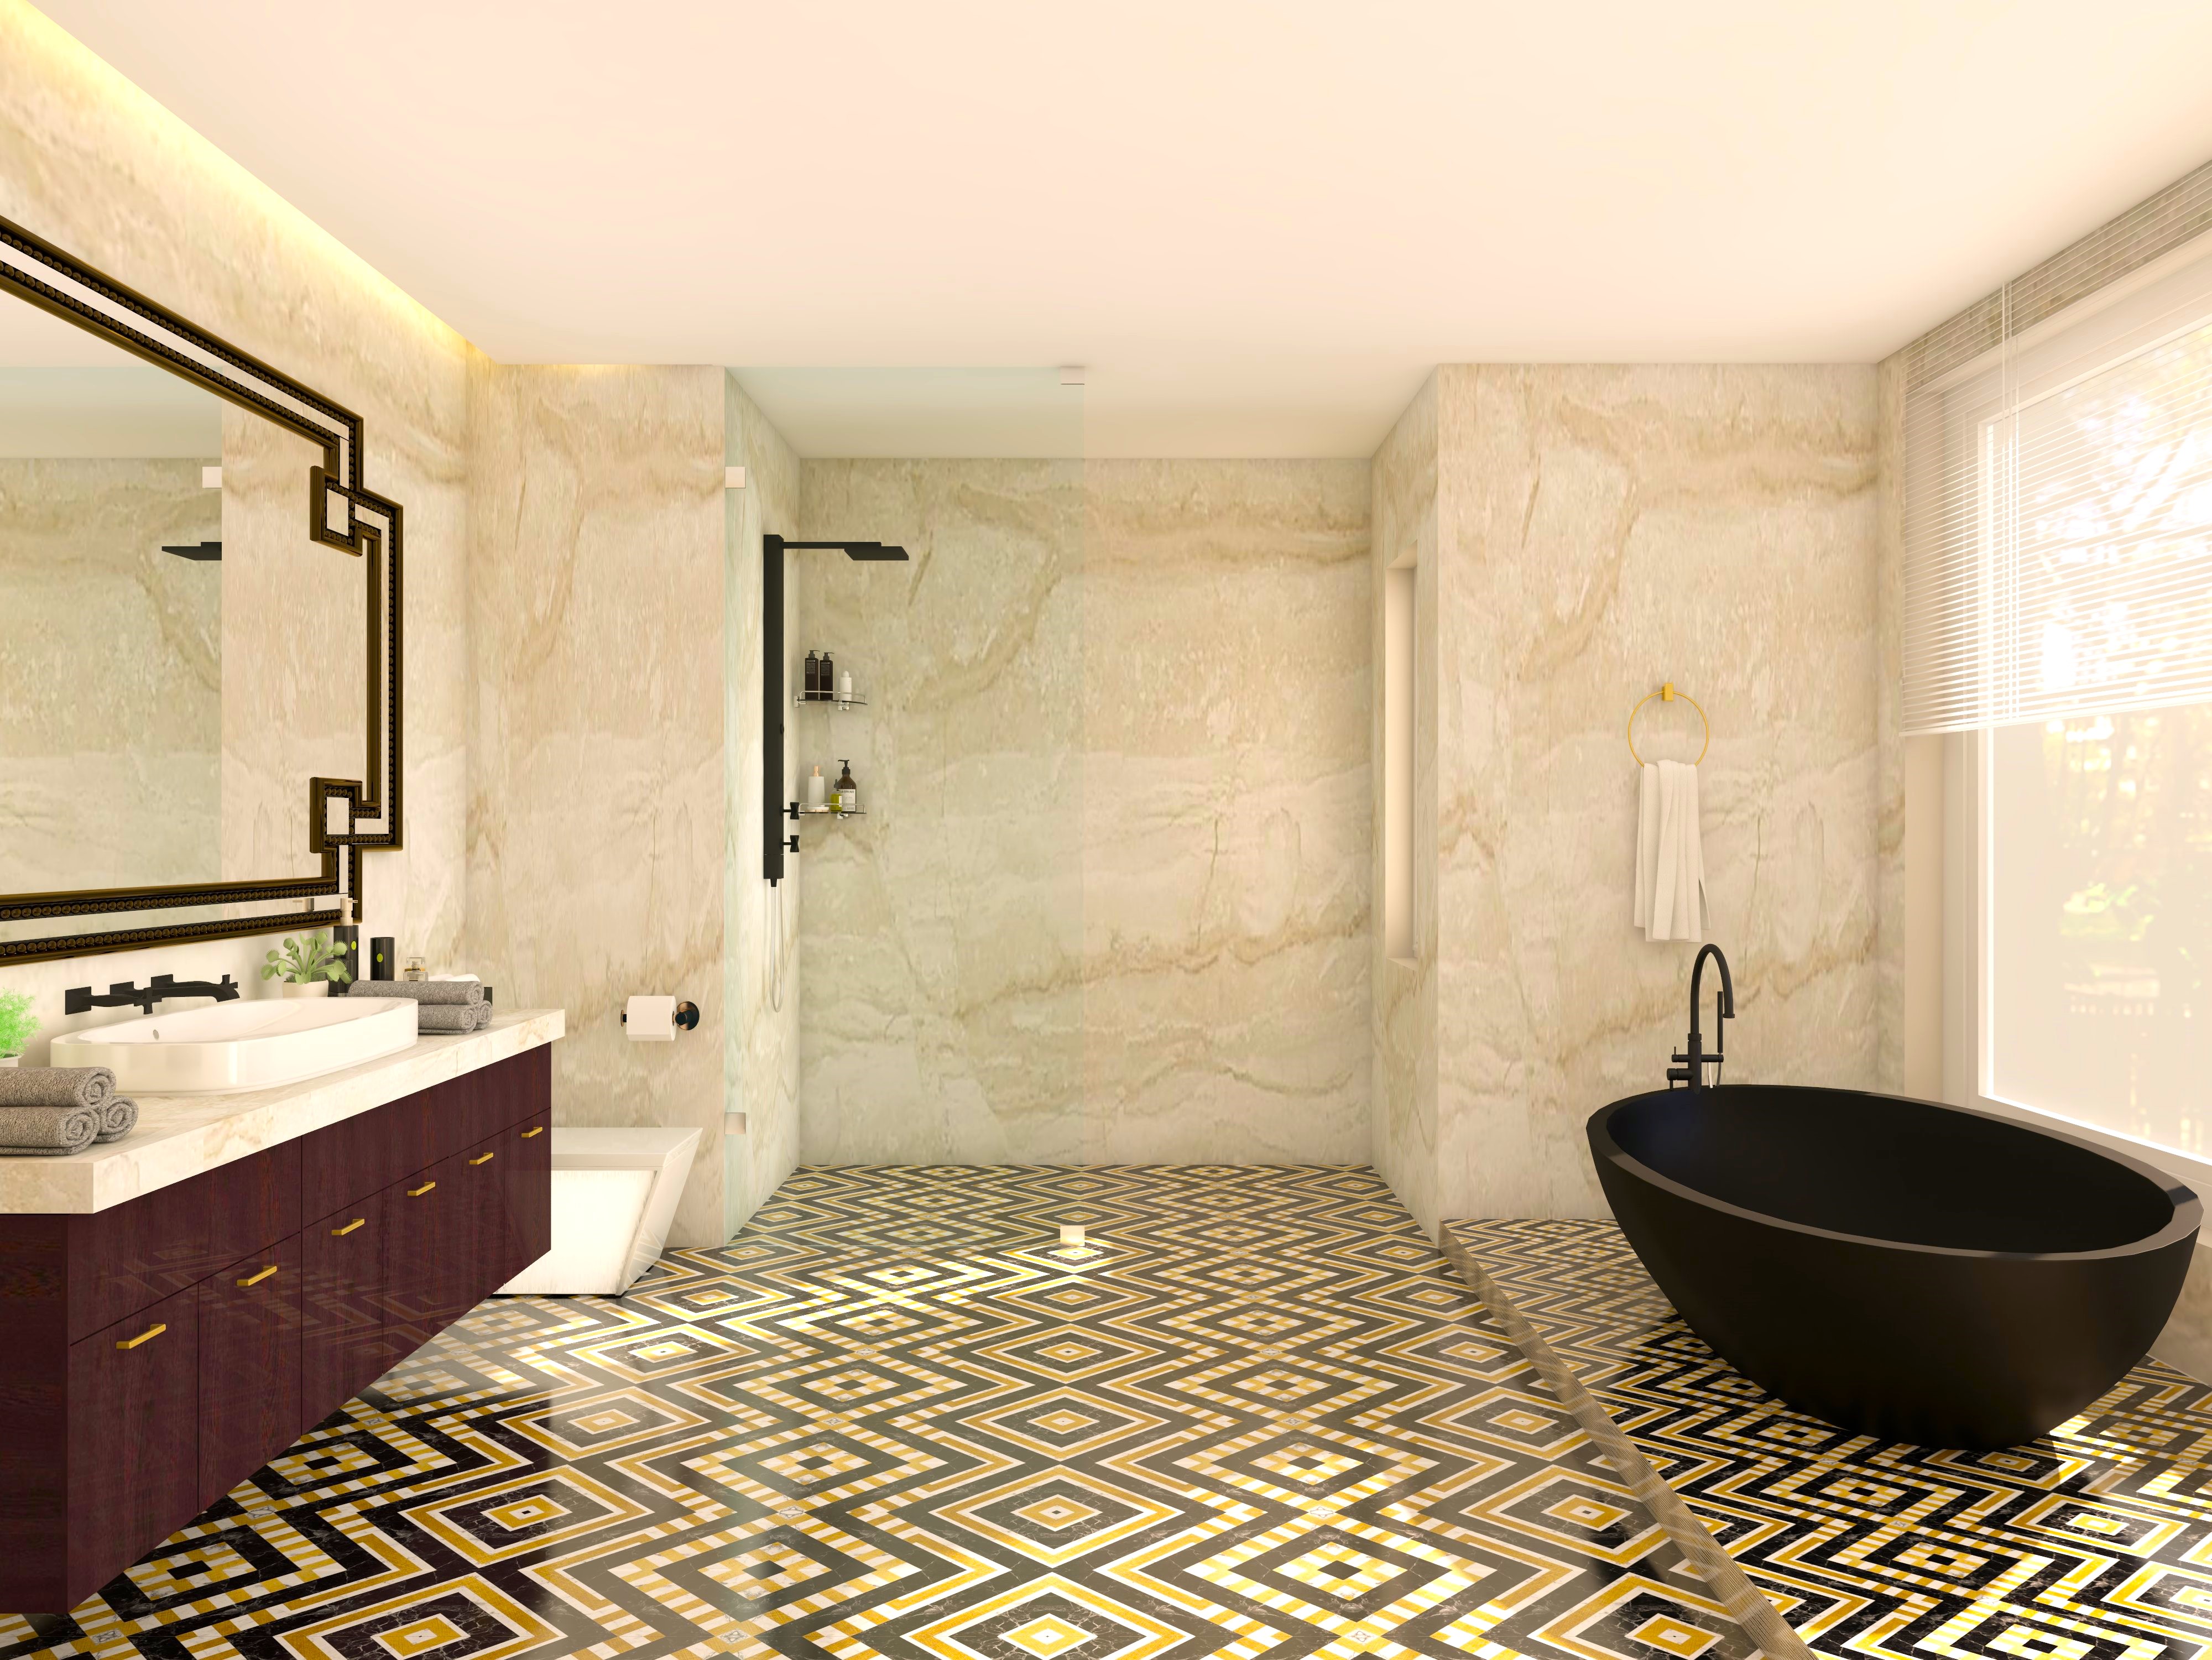 White marble bathroom with patterned tiles and black bathtub